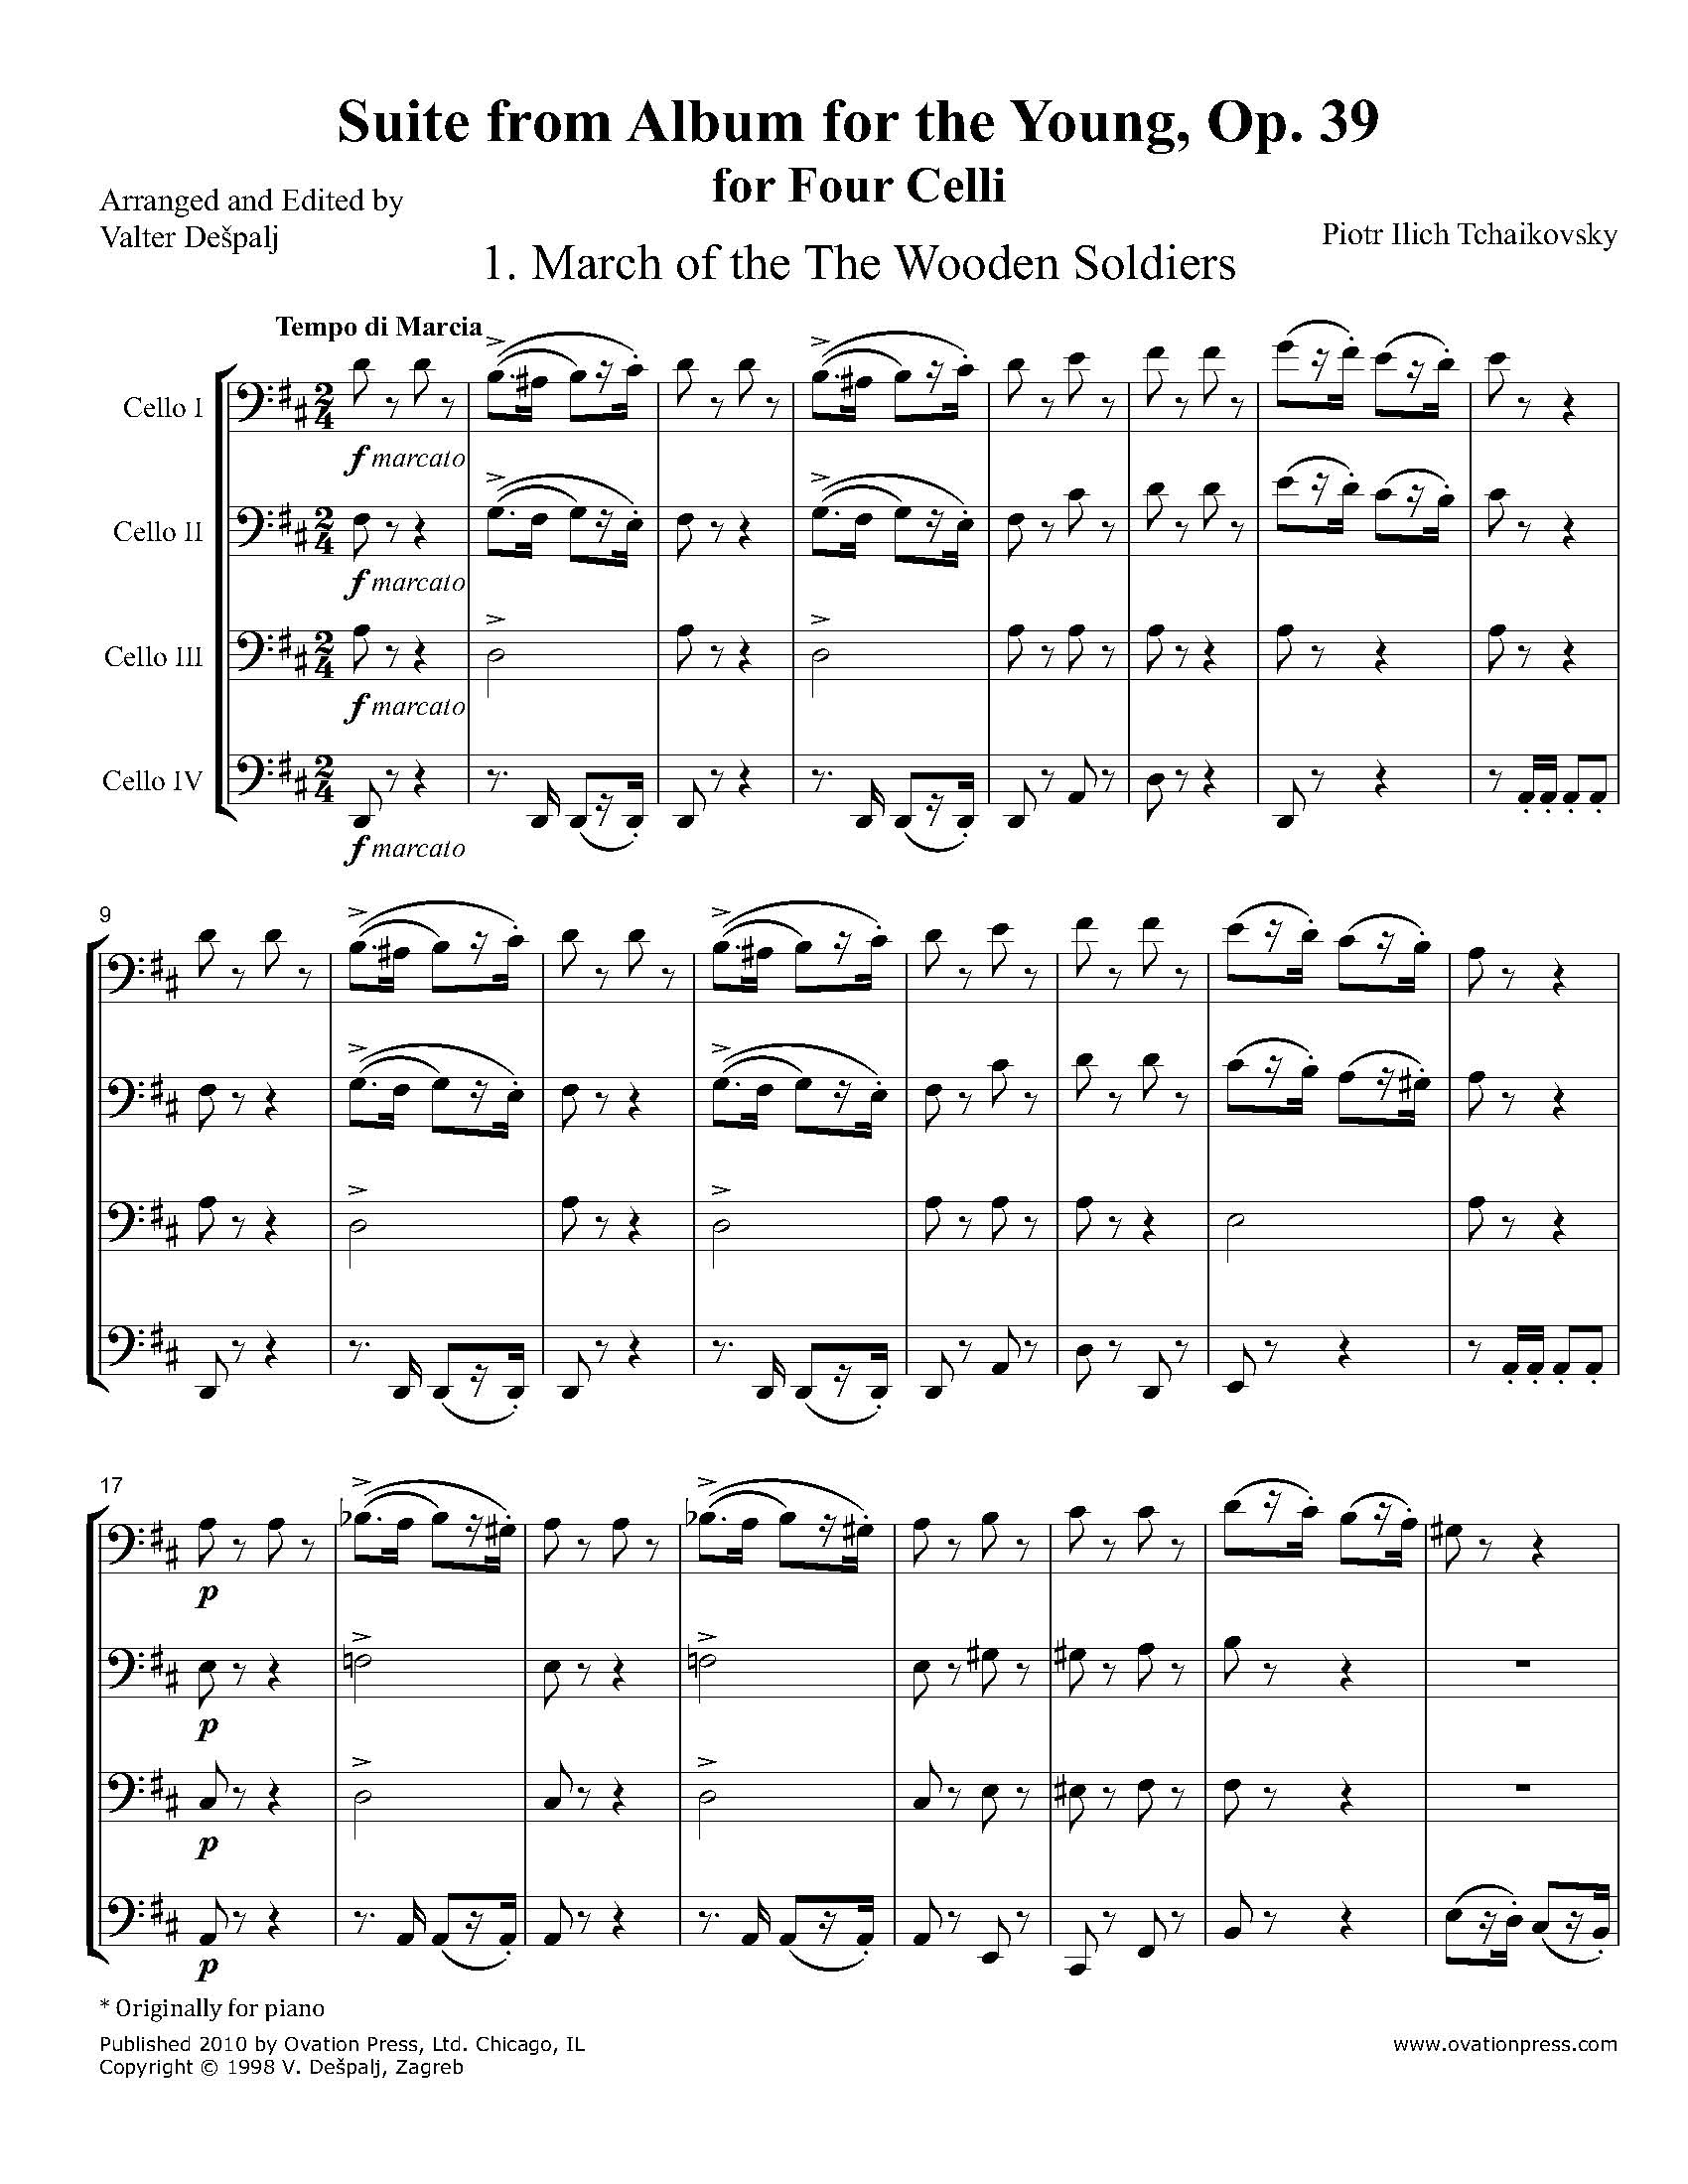 Suite from Album for the Young, Op. 39 (for 4 celli)